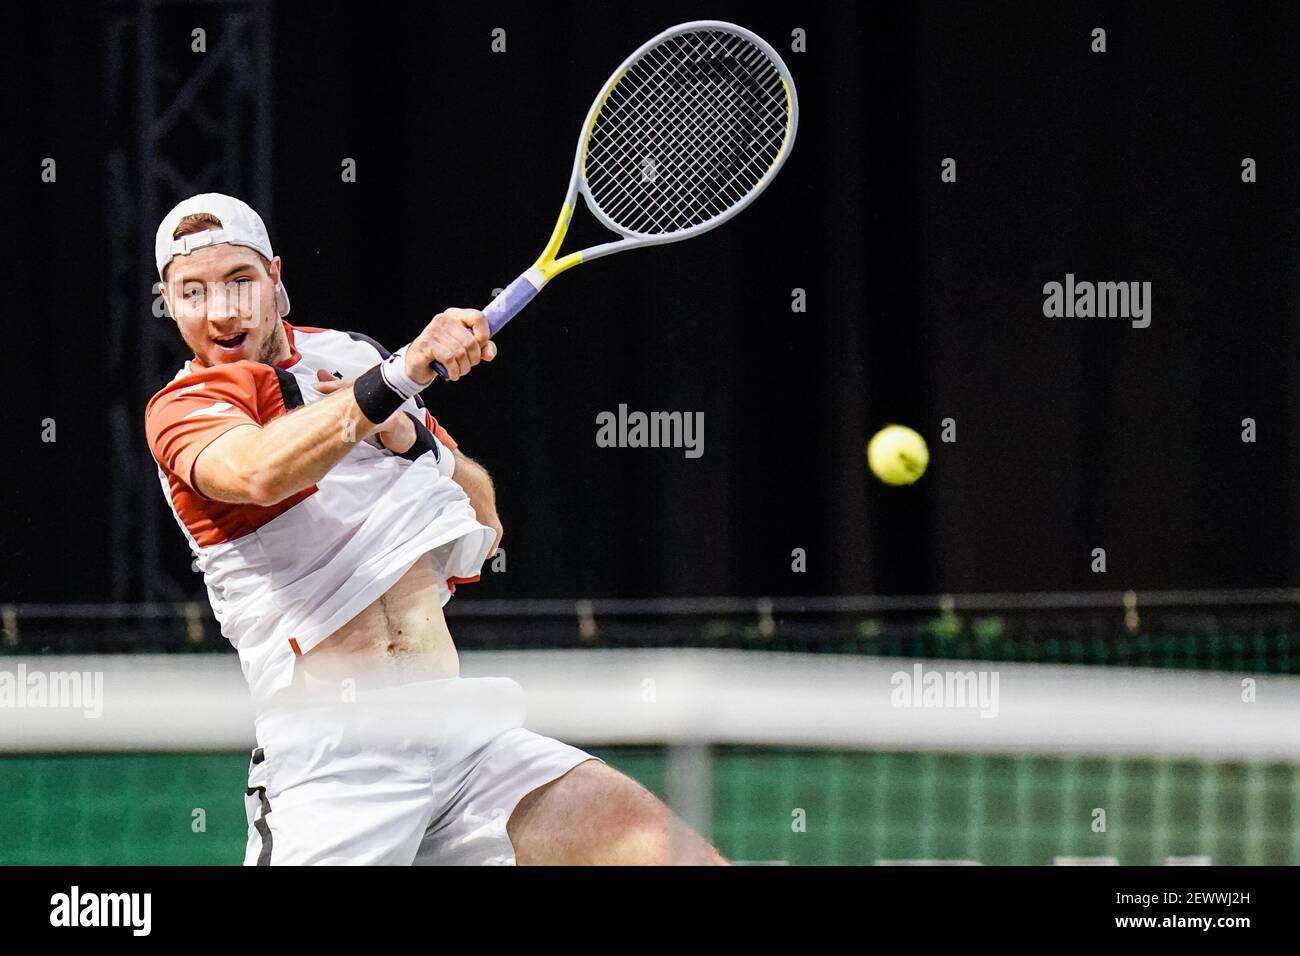 ROTTERDAM, NETHERLANDS - MARCH 3: Jan-Lennard Struff of Germany during his  match against David Goffin of Belarus during the 48e ABN AMRO World Tennis  Tournament at Rotterdam Ahoy on March 3, 2021